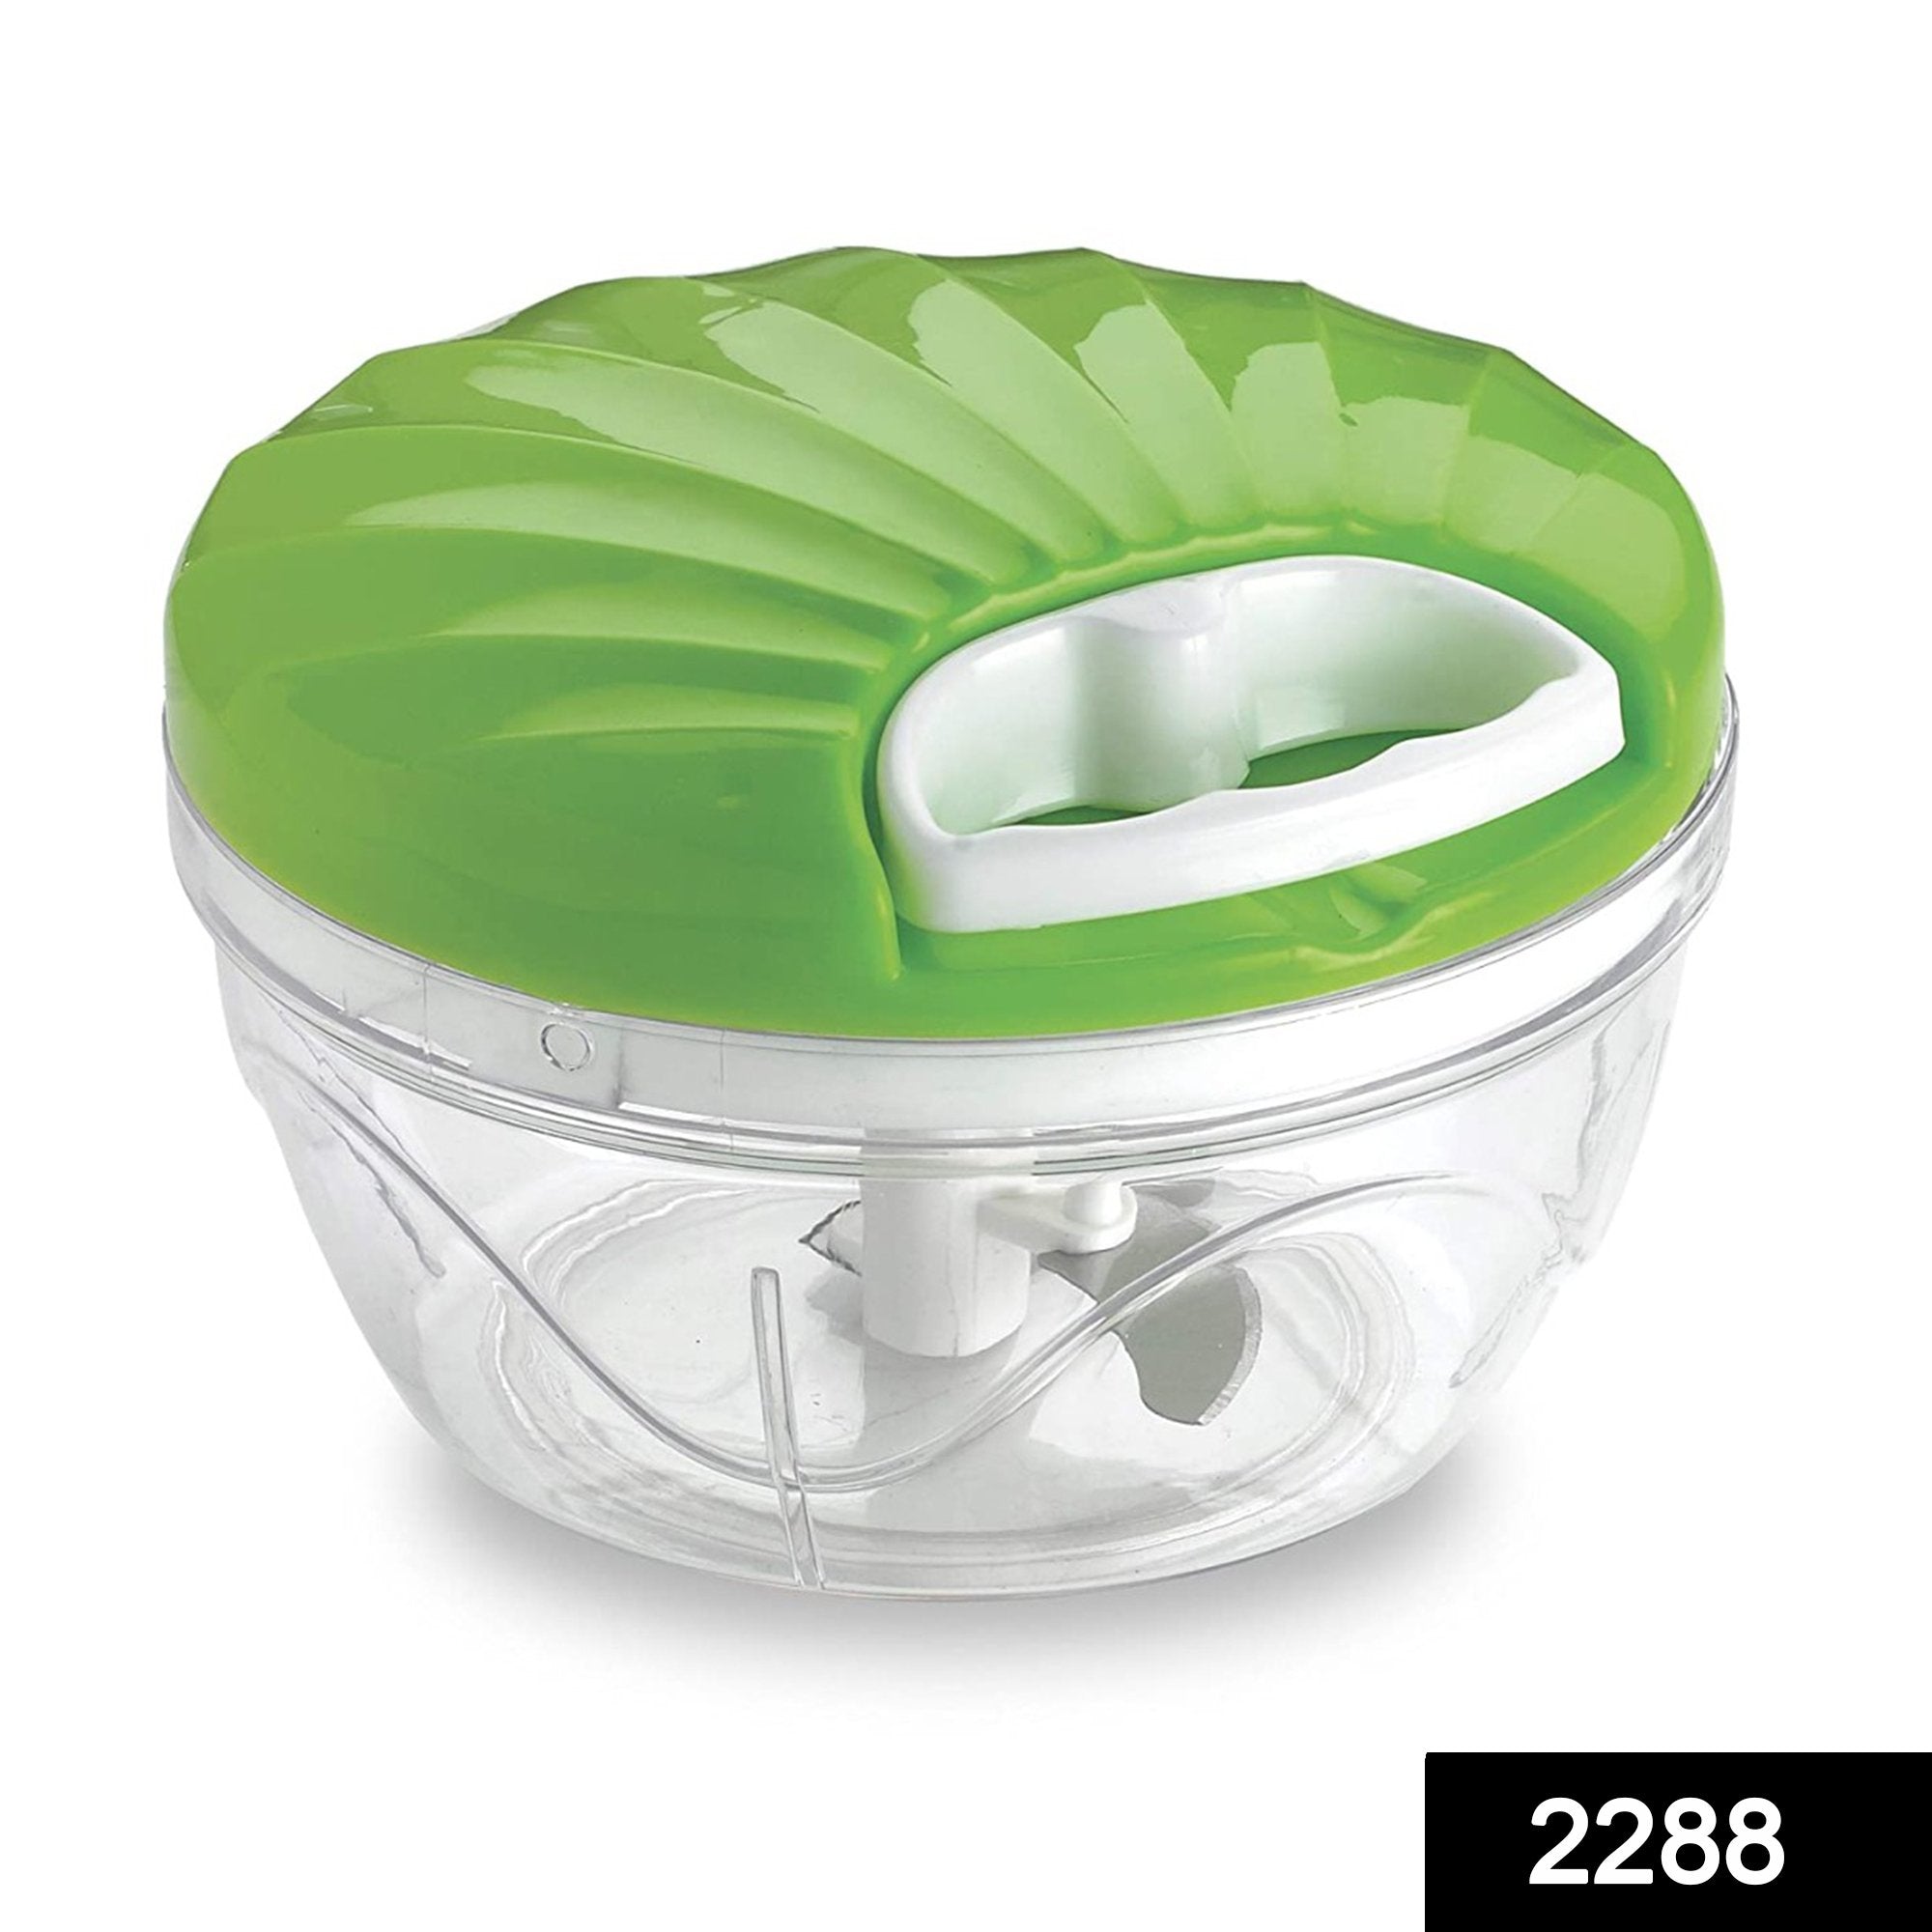 2288 Large Vegetable Chopper with 3 Blades (Multicolour) (550 ml) - SkyShopy